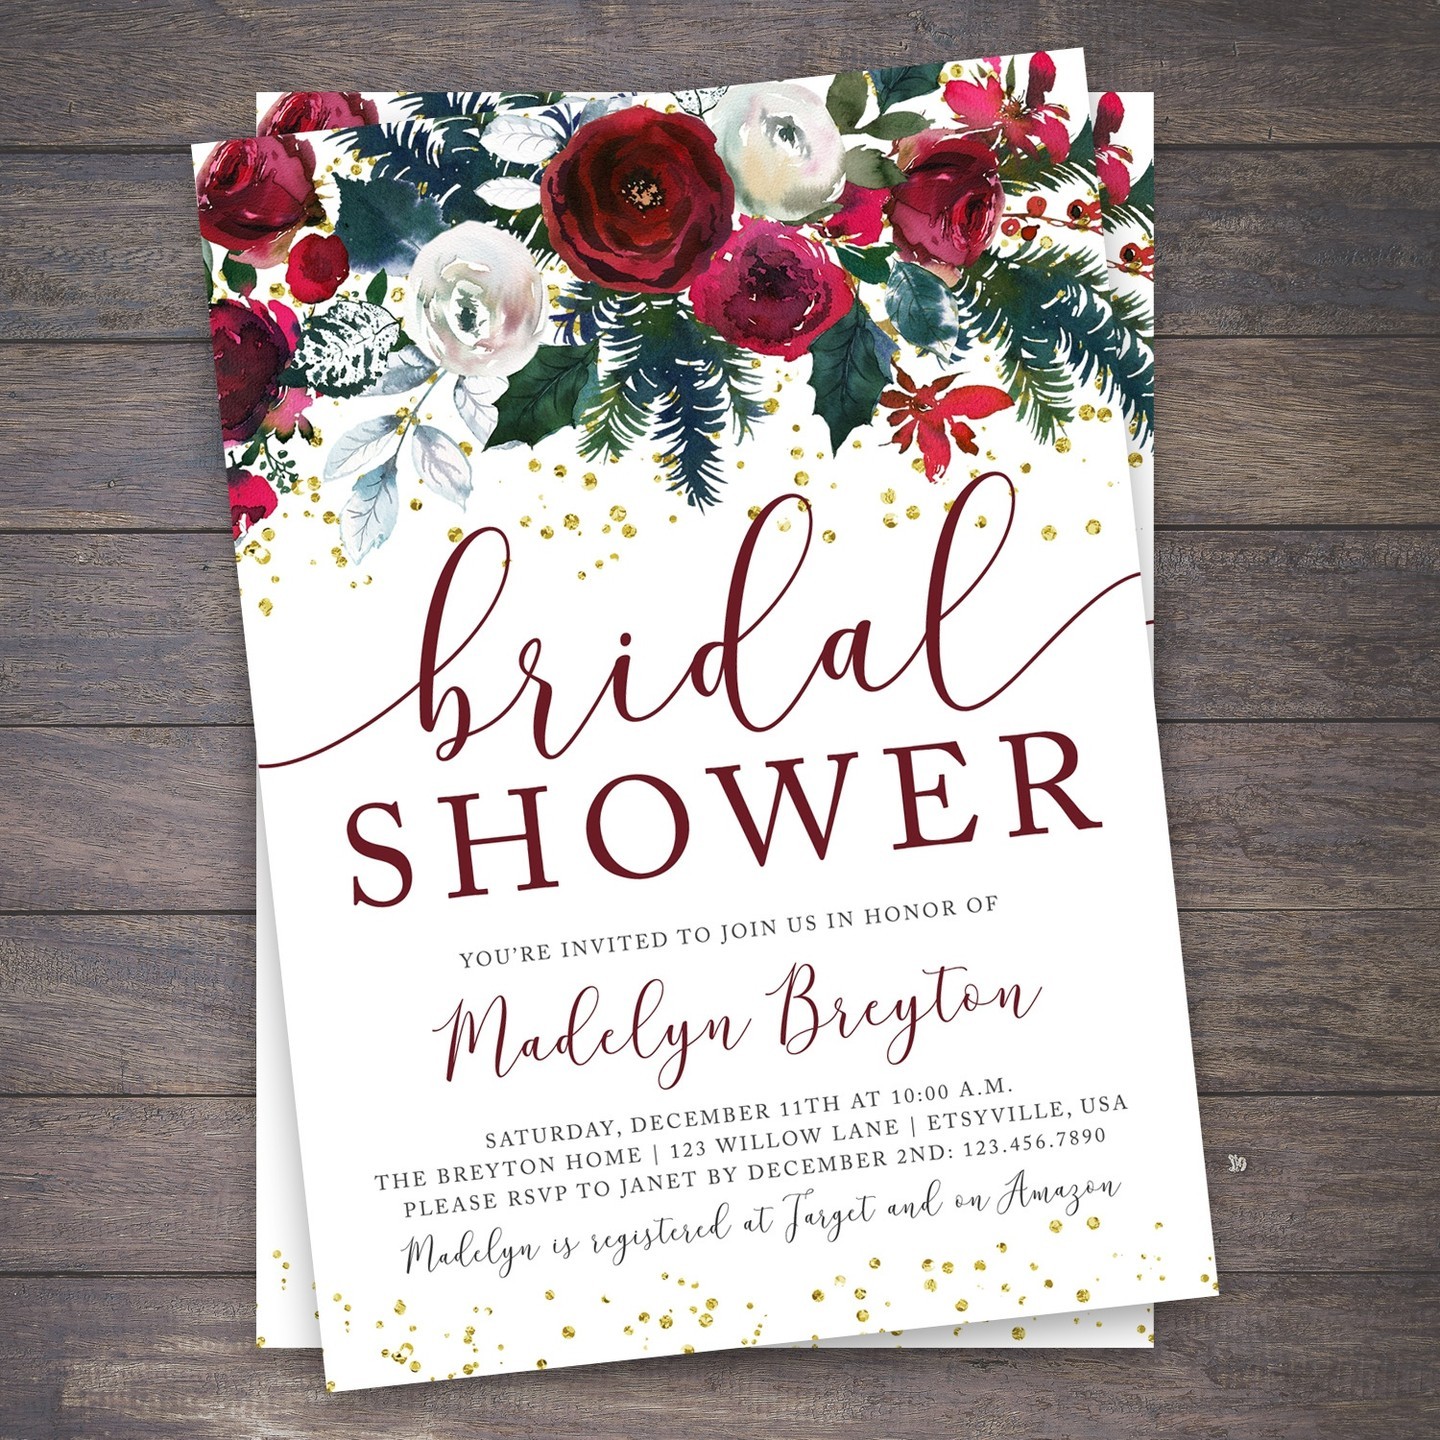 I love this deep red for holiday showers and parties - so classy & elegant!⁠
⁠
#bridalshower #bridalshowerinvites #bridalshowerinvitations #customizedinvitations #customizedinvites #personalizedinvites #racheldesignsshop